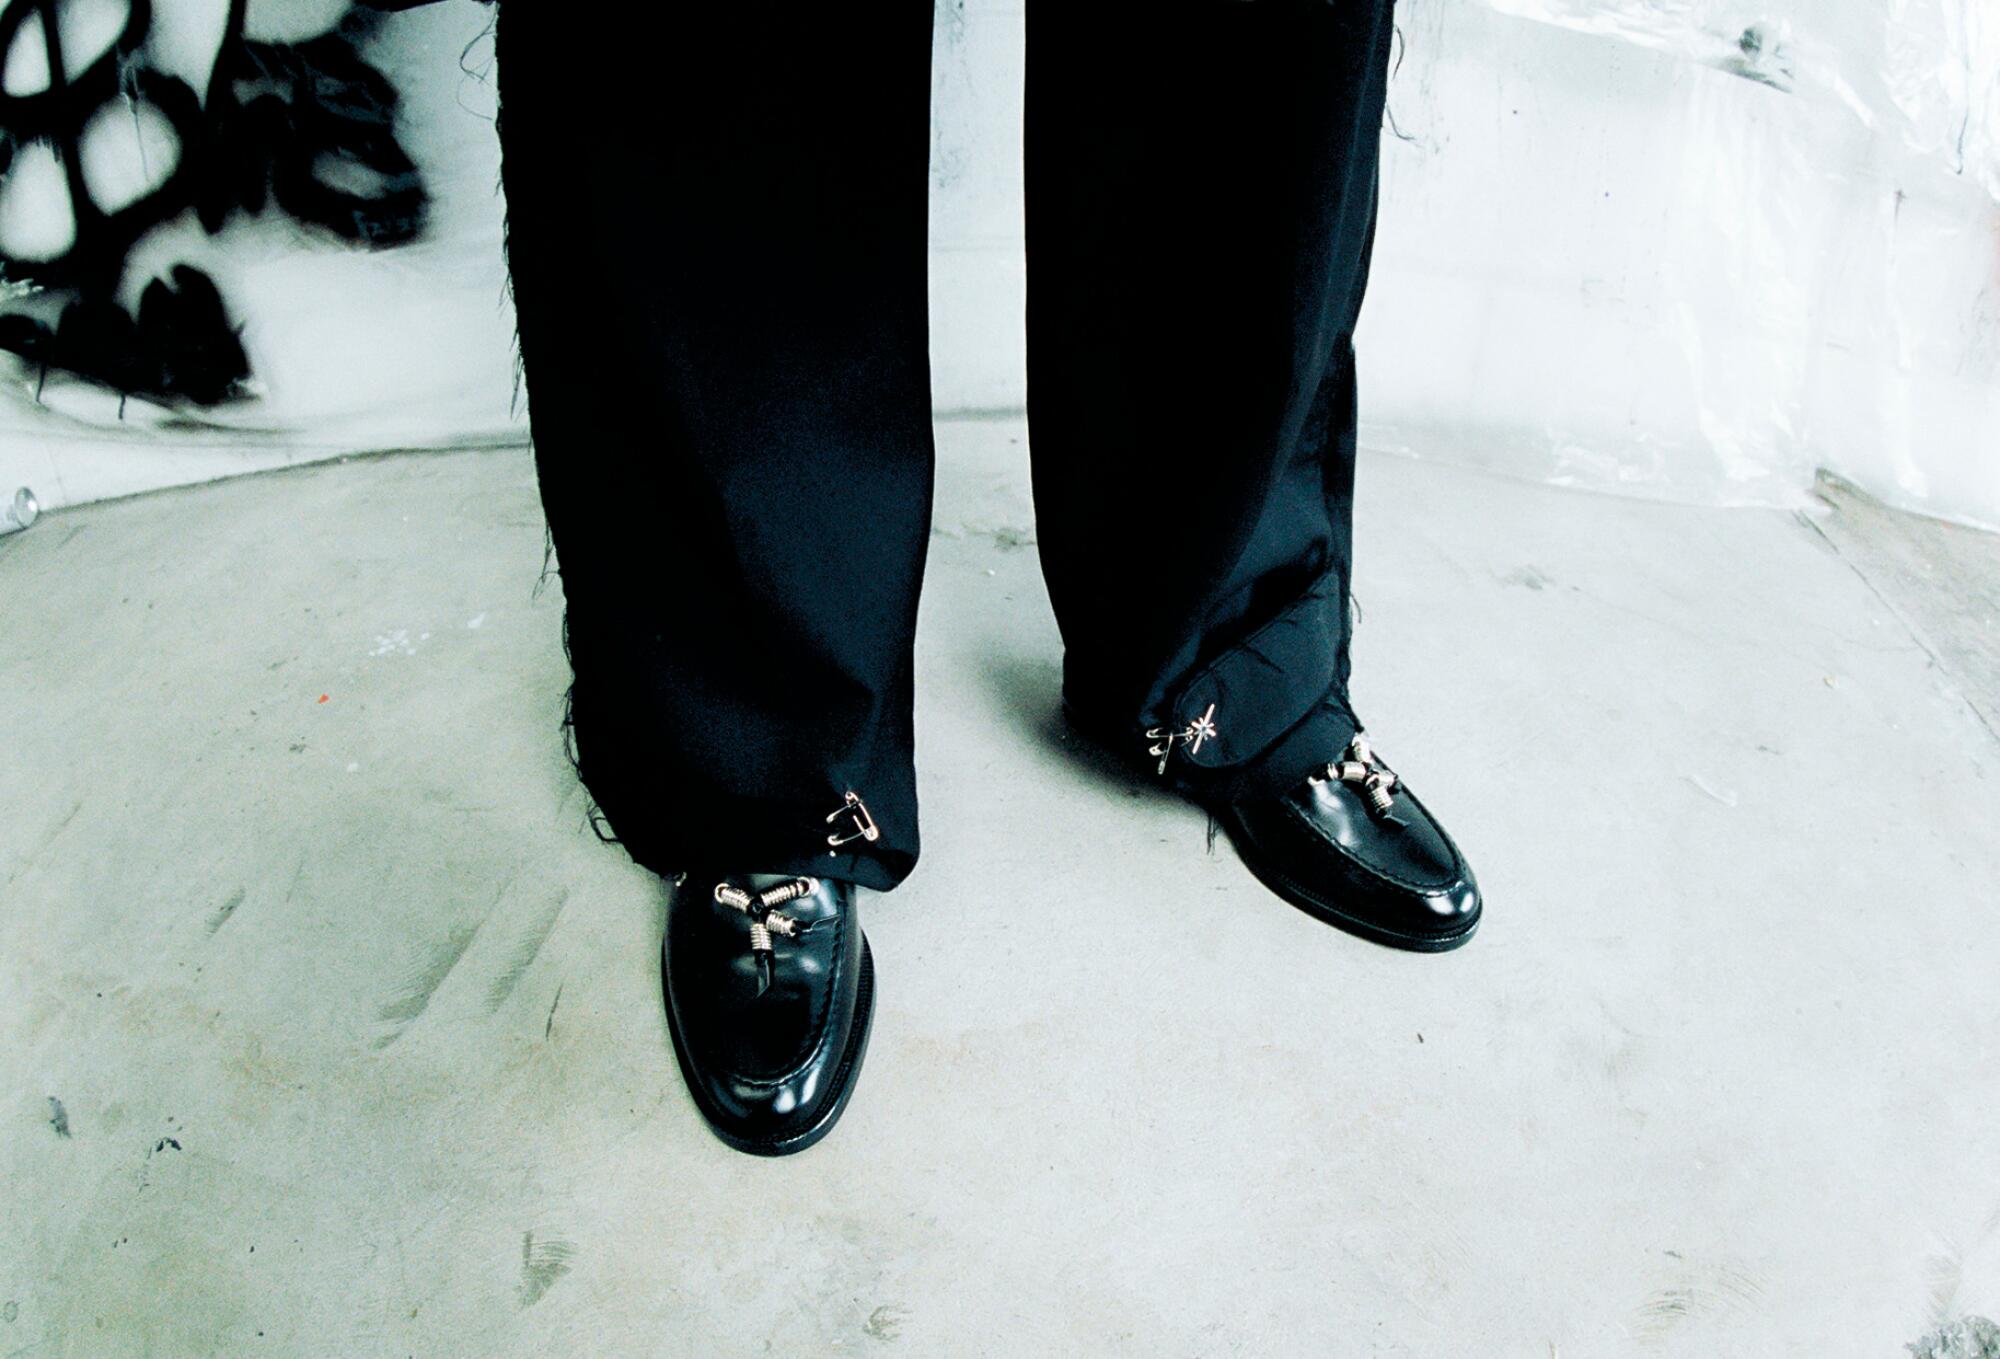 A person's lower legs clad in black pants with black shoes.